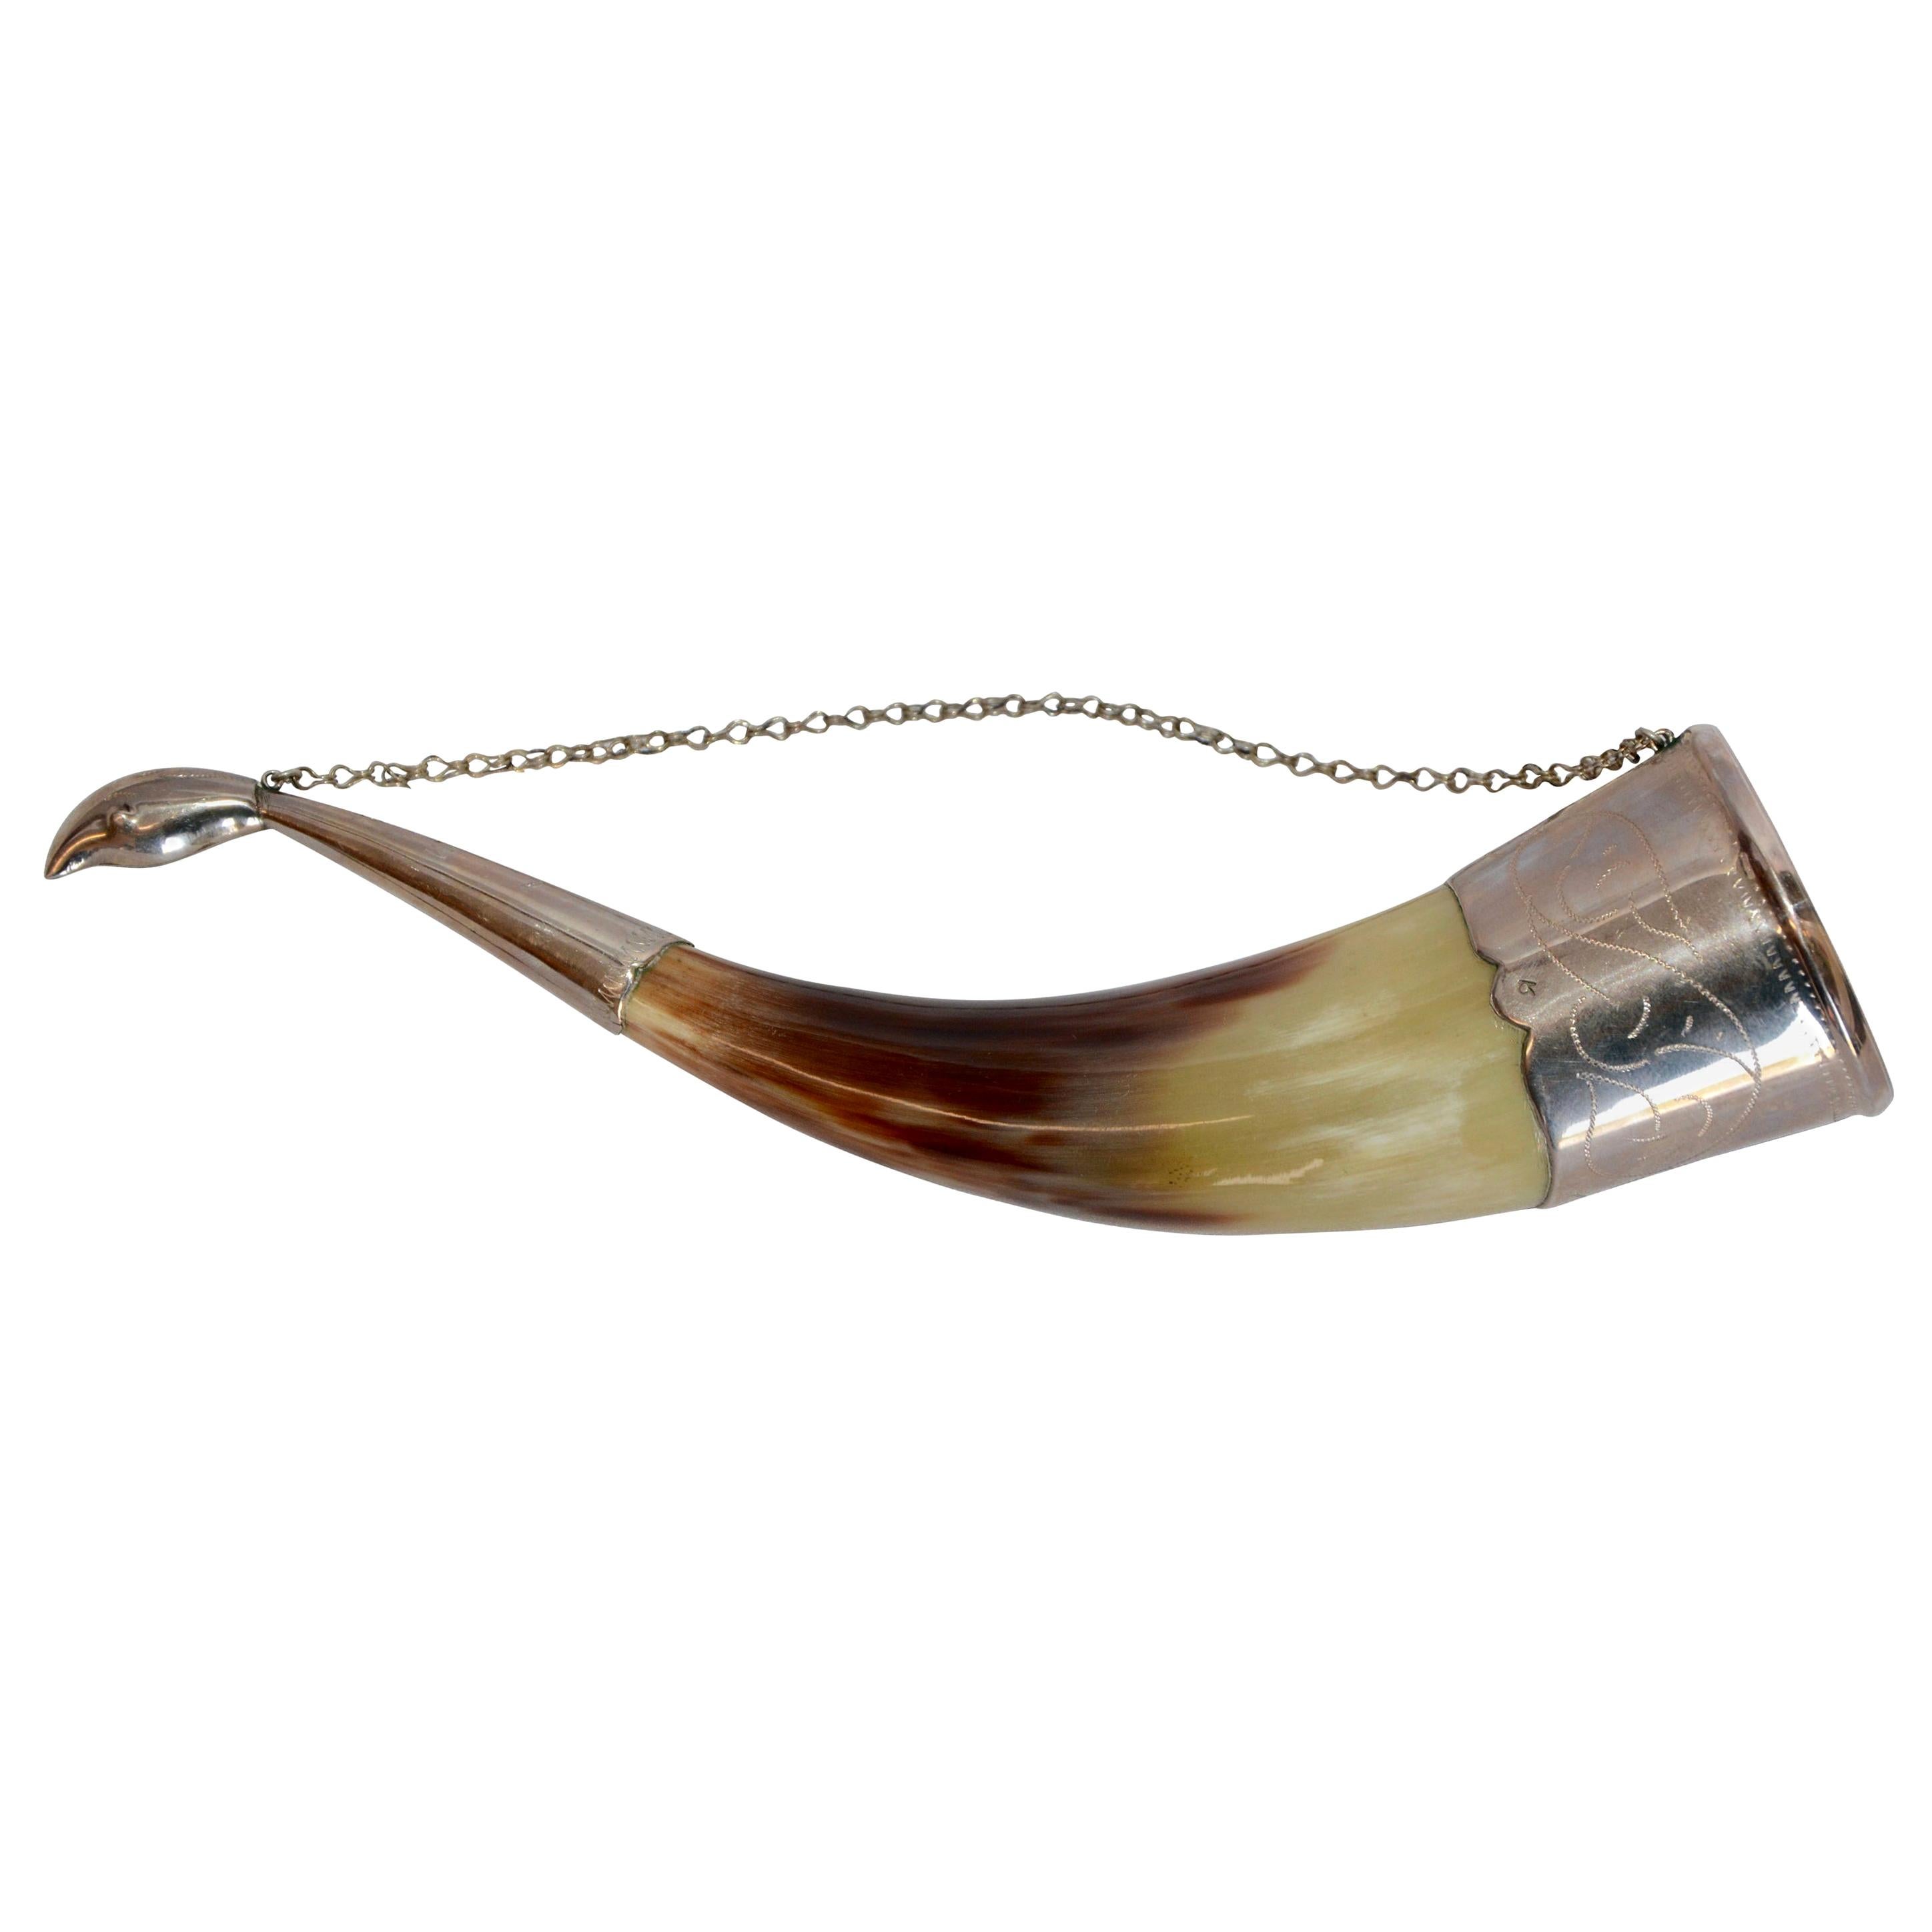 Russian Caucasian Silver Alloy Drinking Horns Midcentury For Sale